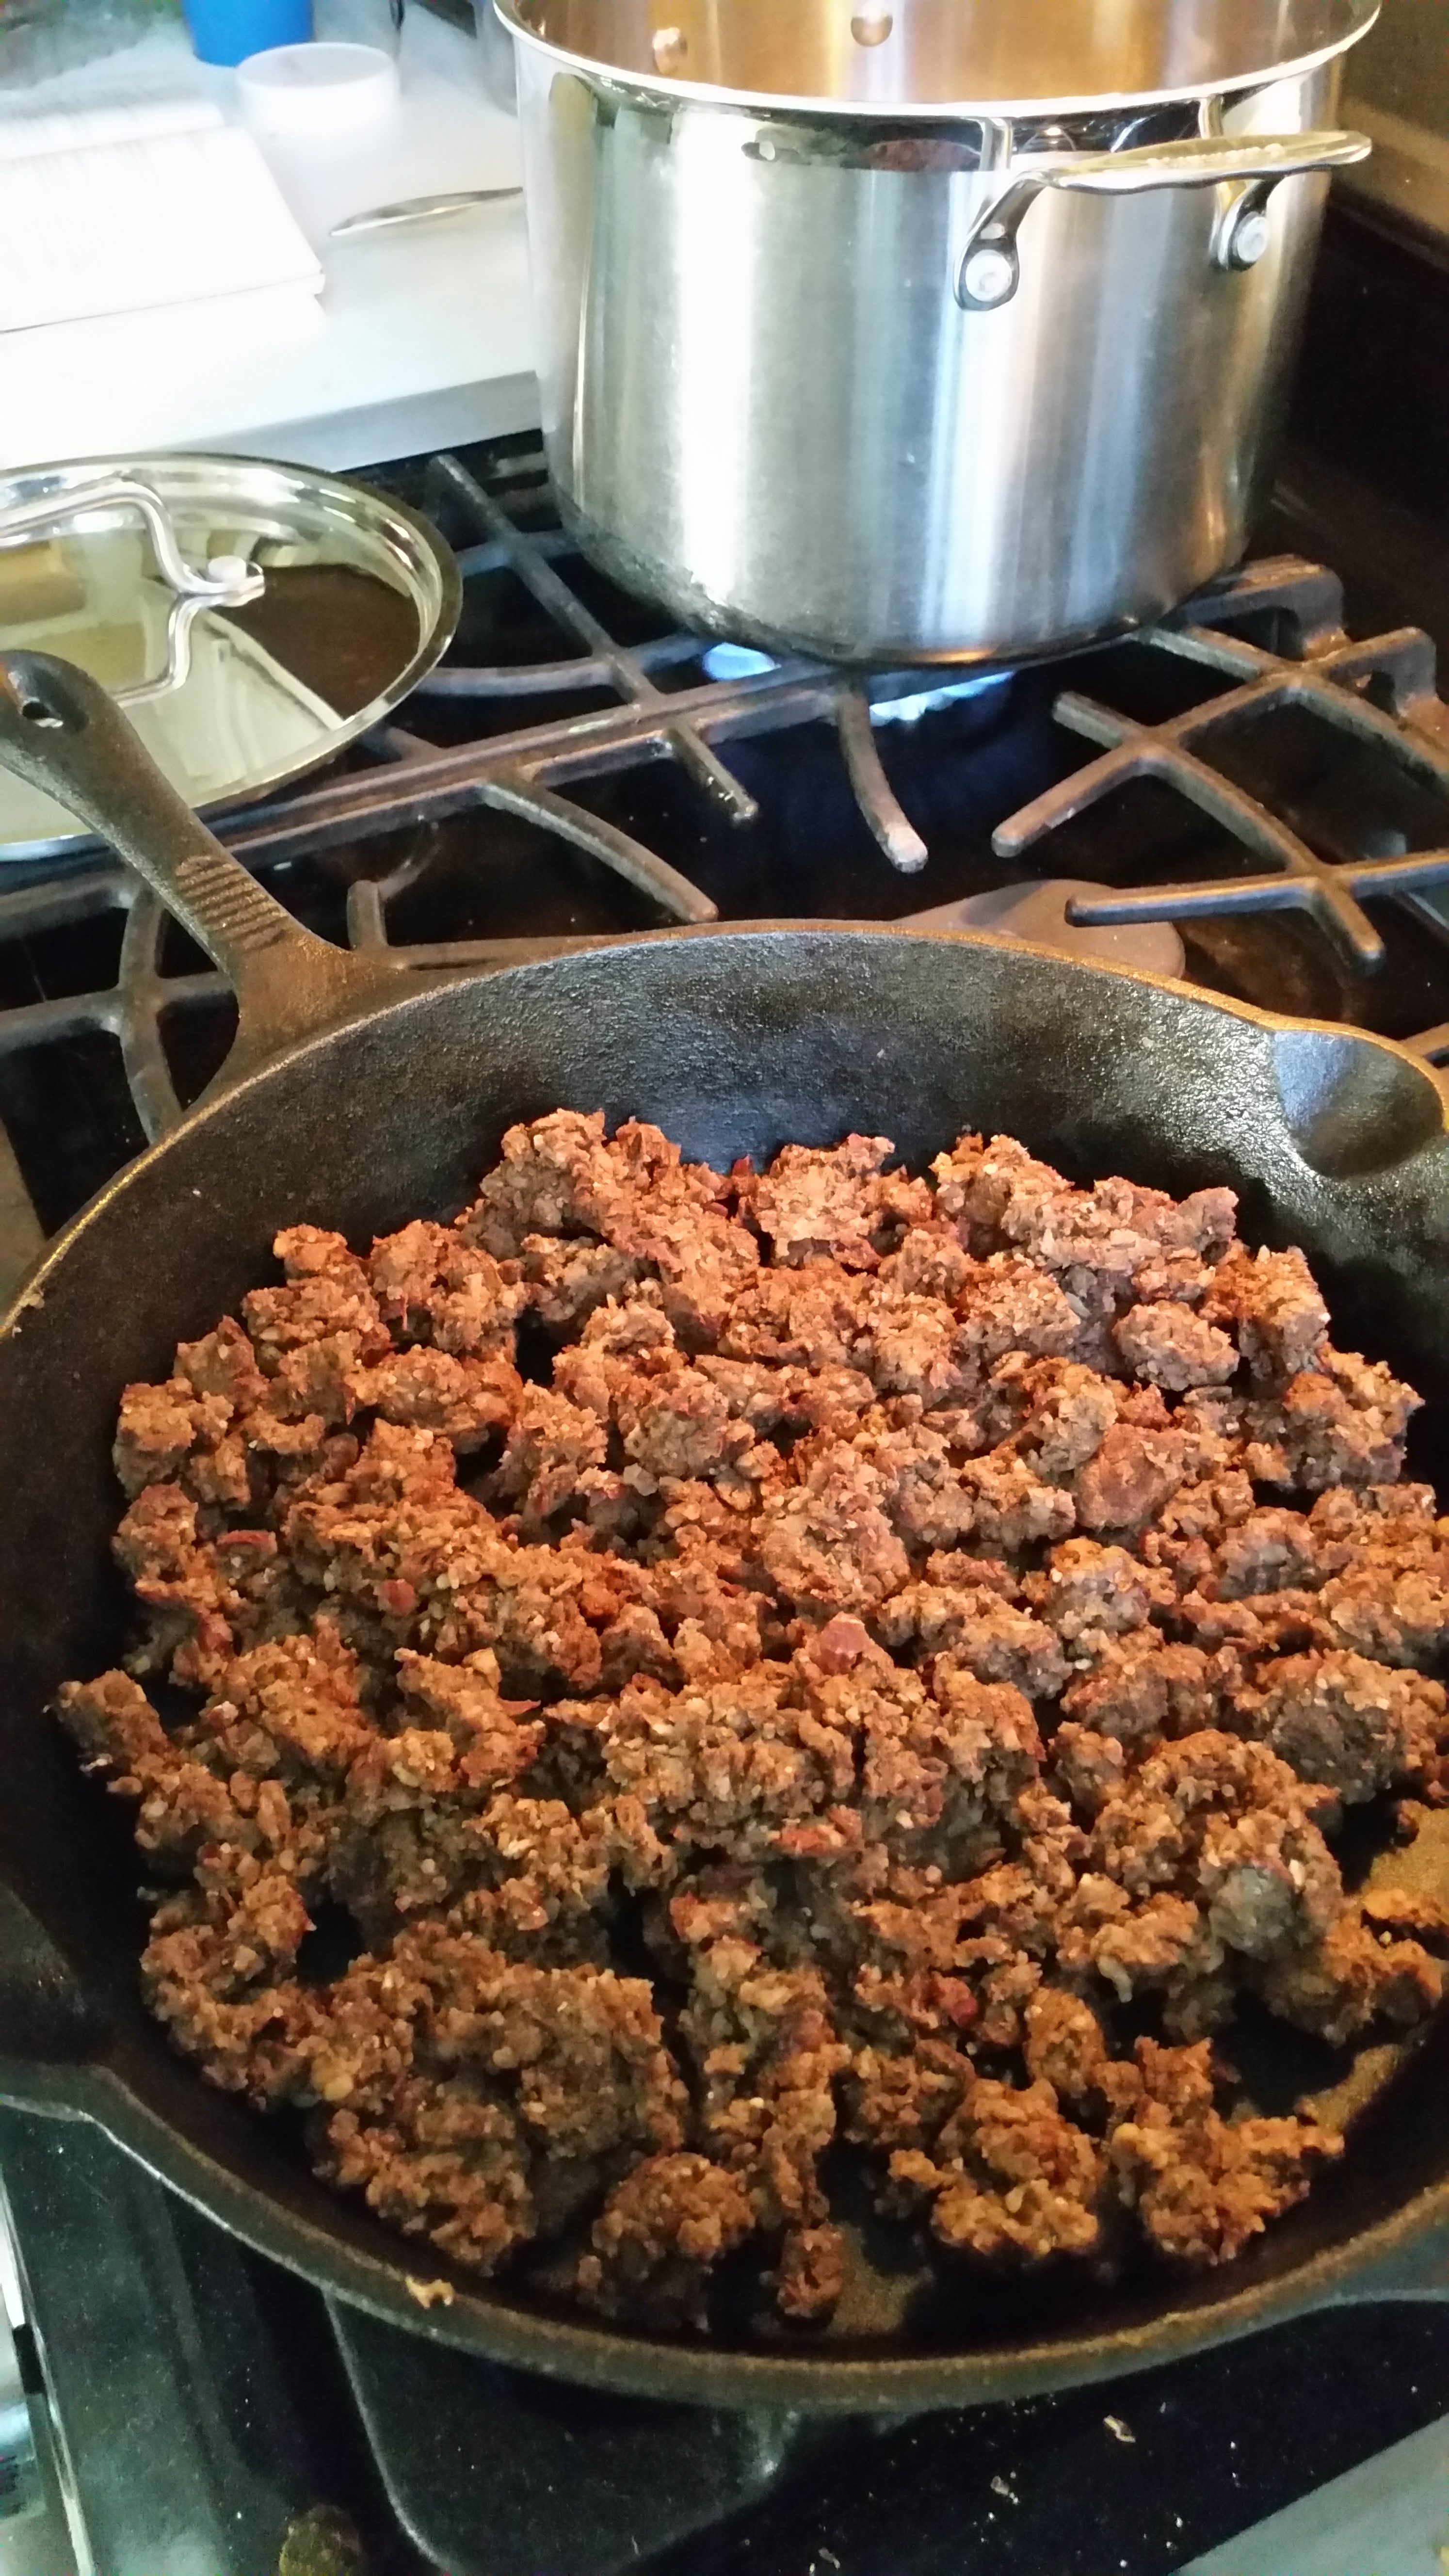 High-protein homemade vegan sausage crumbles made from walnuts, beans, and mushrooms.